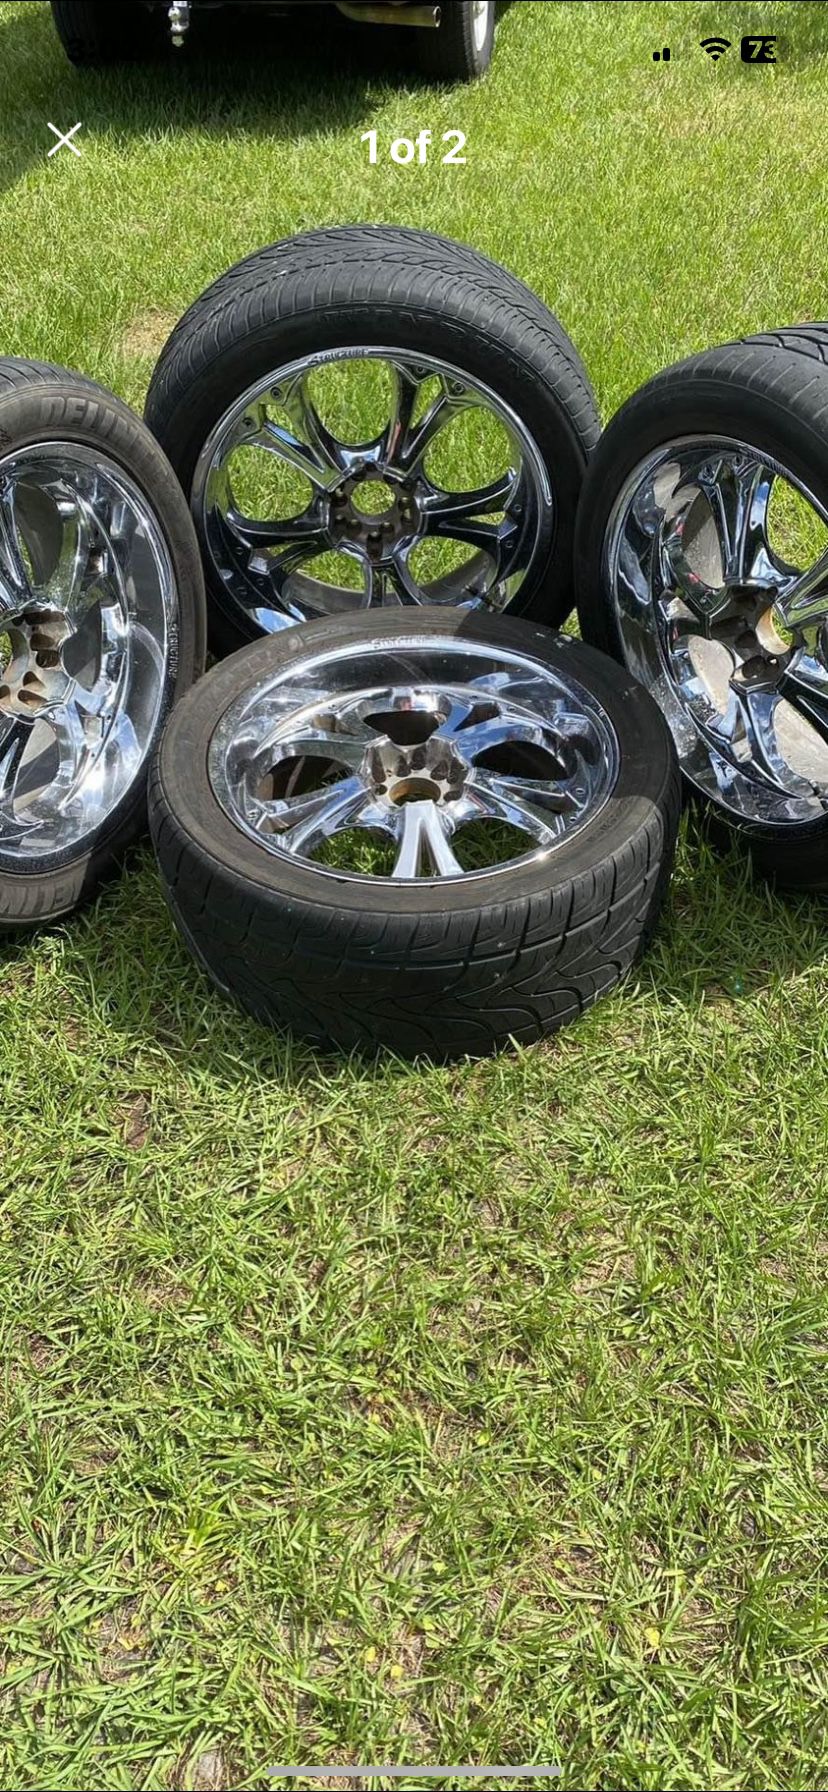 22 inch chrome wheels no center cap needs a couple tires $400 or best offer